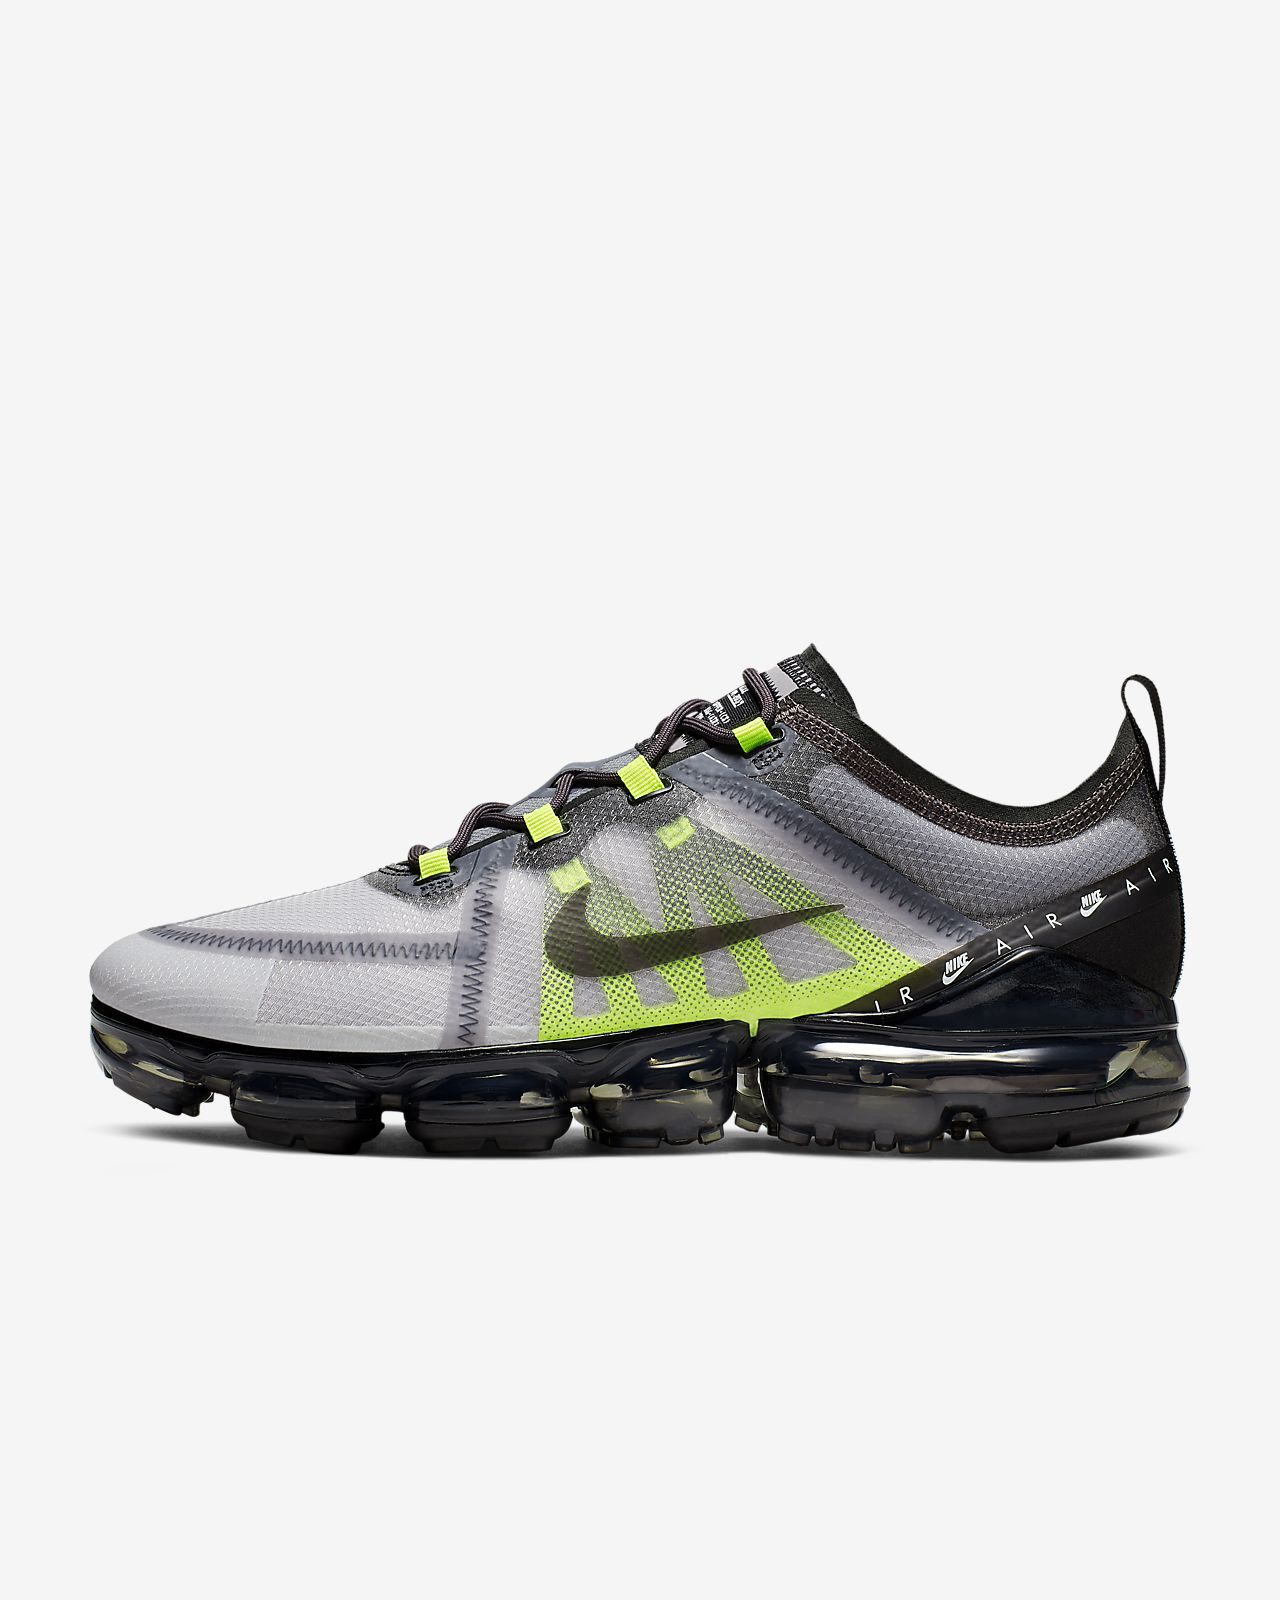 Nike Vapormax 97 Atmosphere Gray Release Info